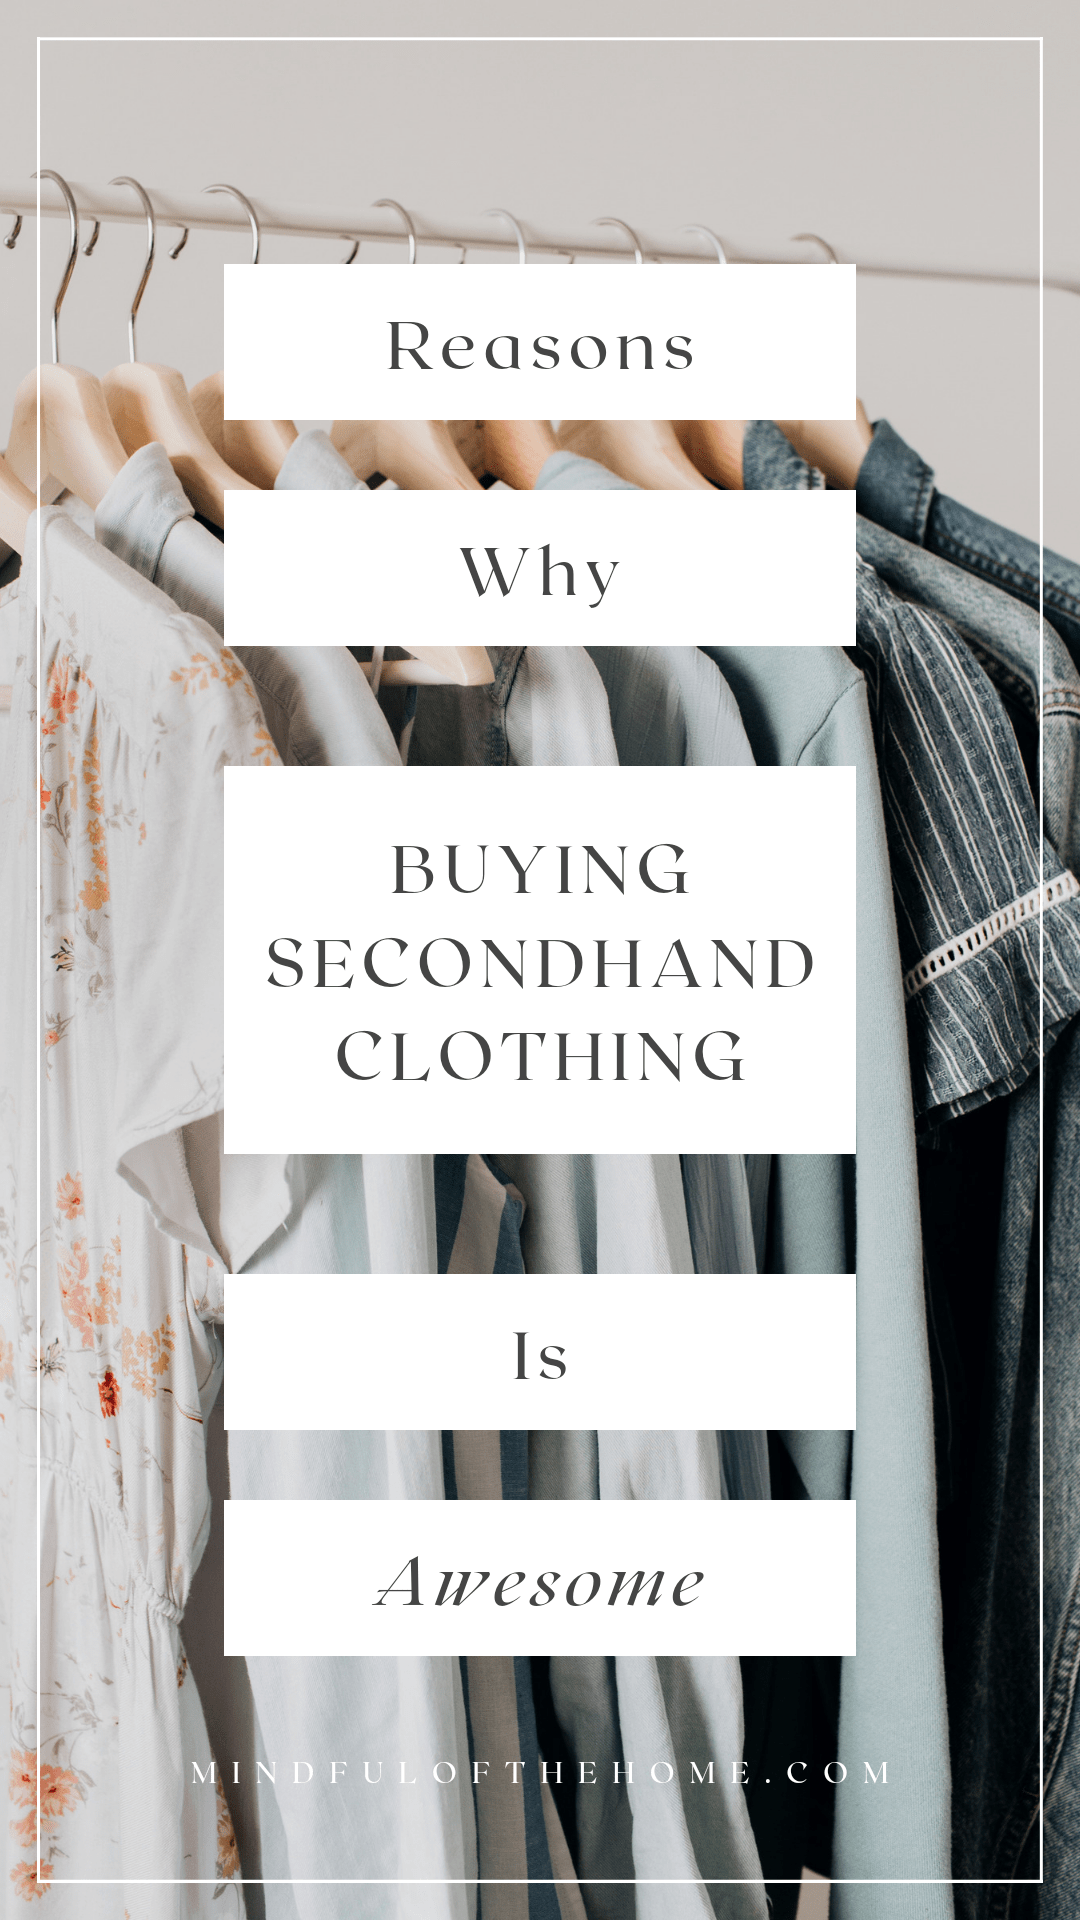 5 reasons to buy secondhand